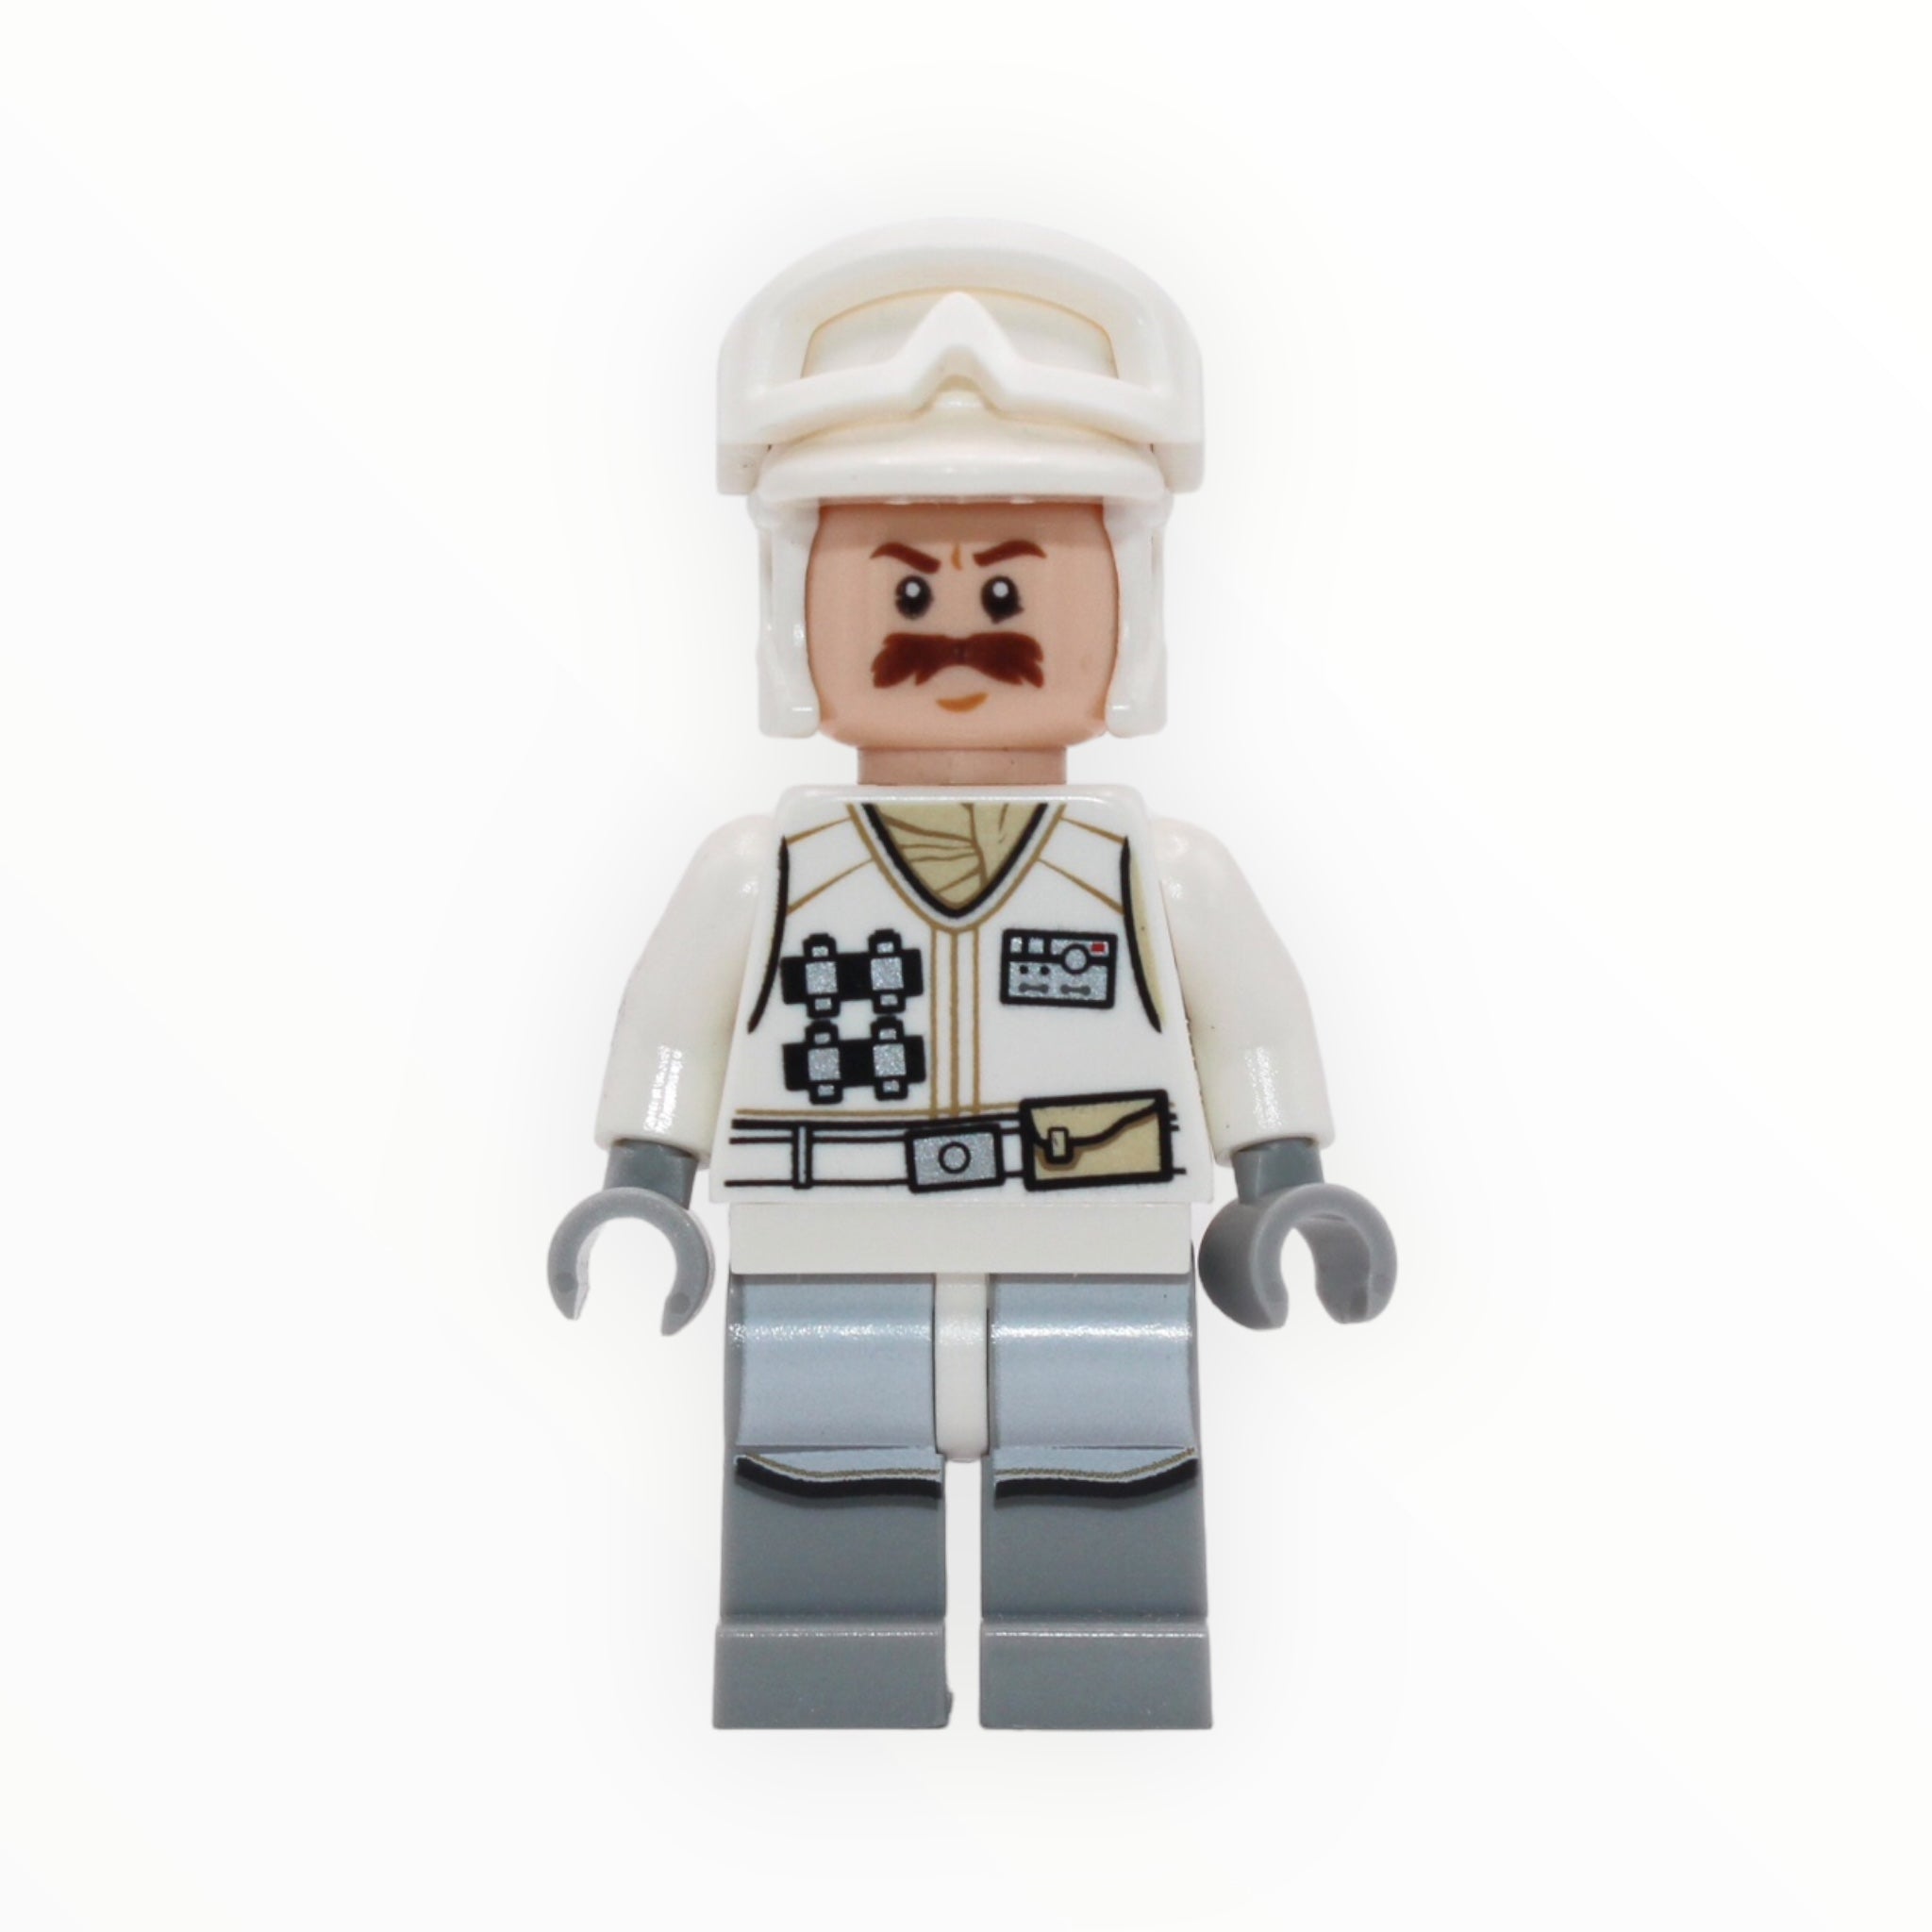 Hoth Rebel Trooper (white uniform and hat, brown moustache, printed light bluish gray legs, 2016)